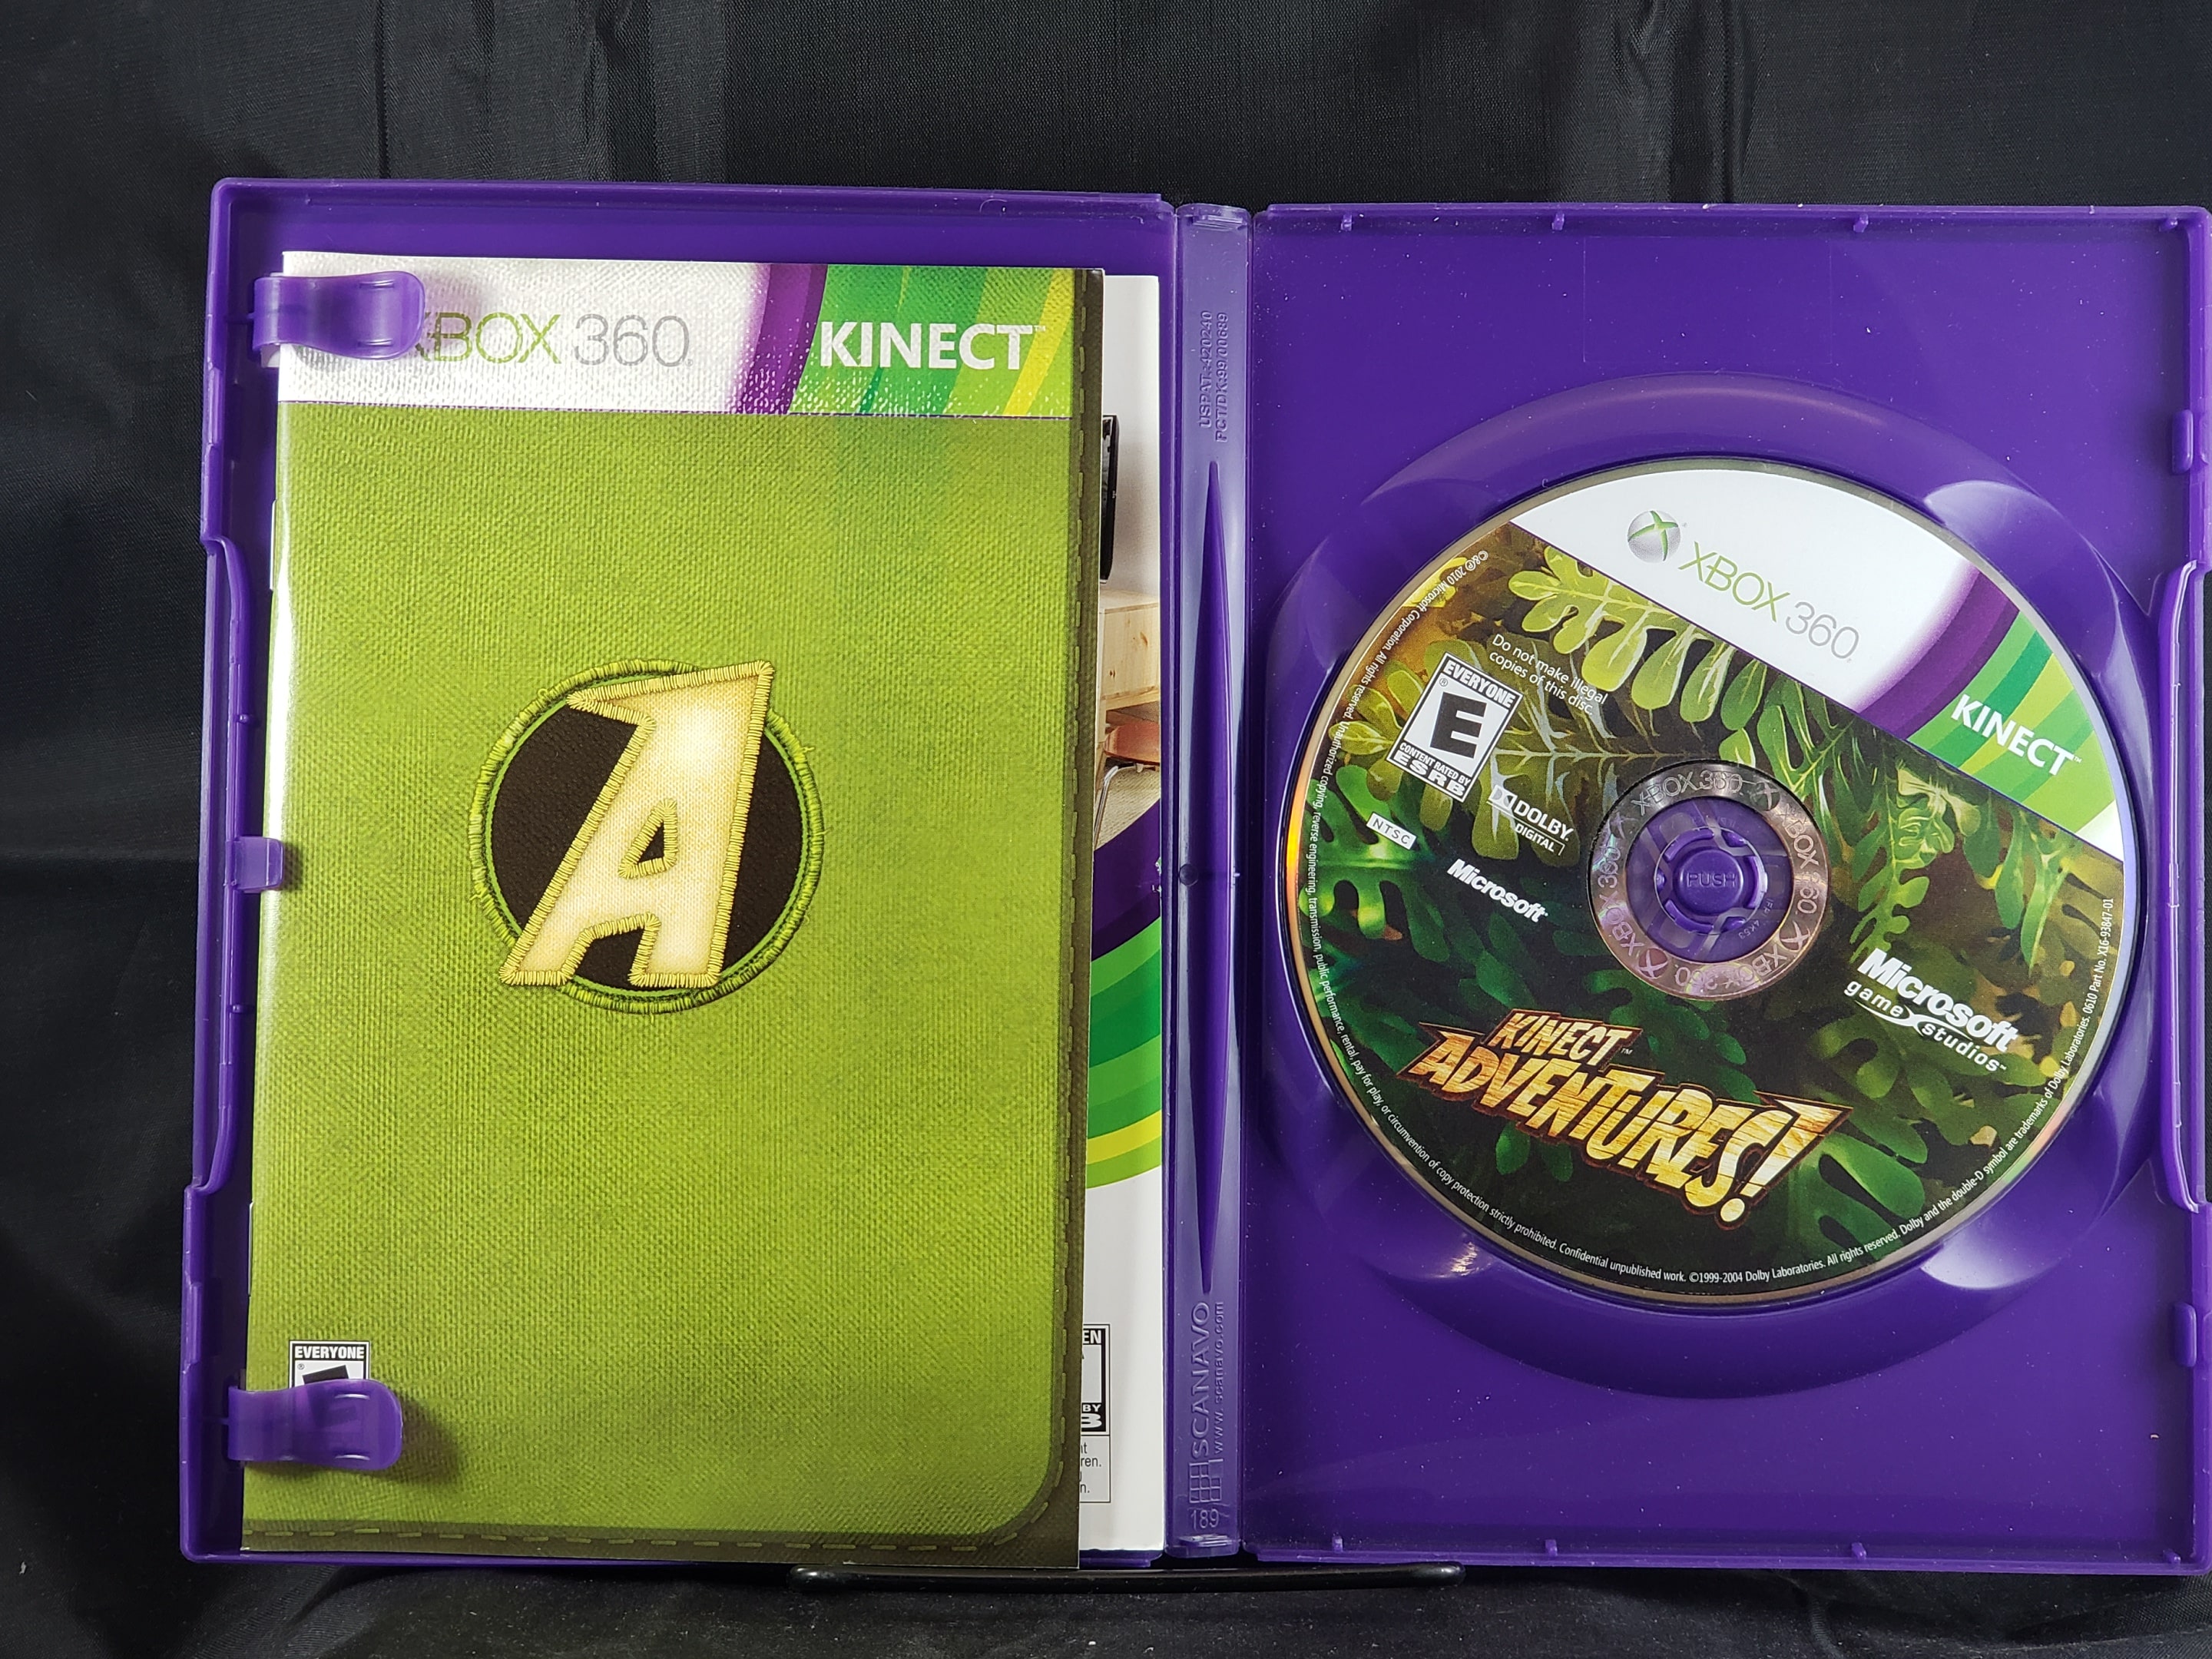 Restored Kinect Sensor For Xbox 360 With Kinect Adventures (Refurbished)